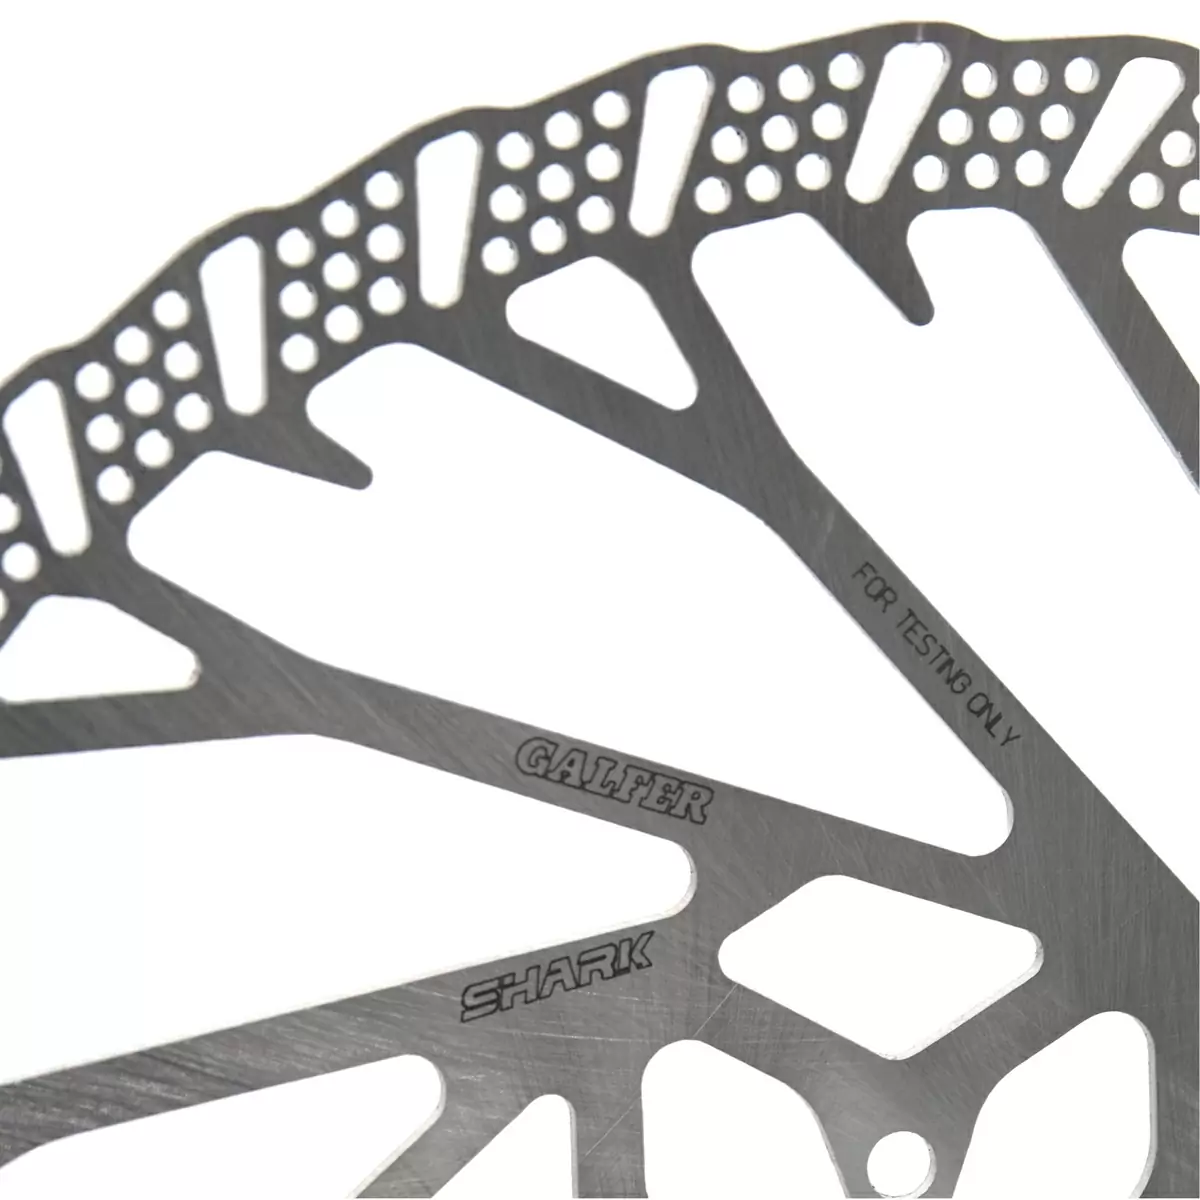 Shark Disc 180mm 6 holes 2mm thickness #1